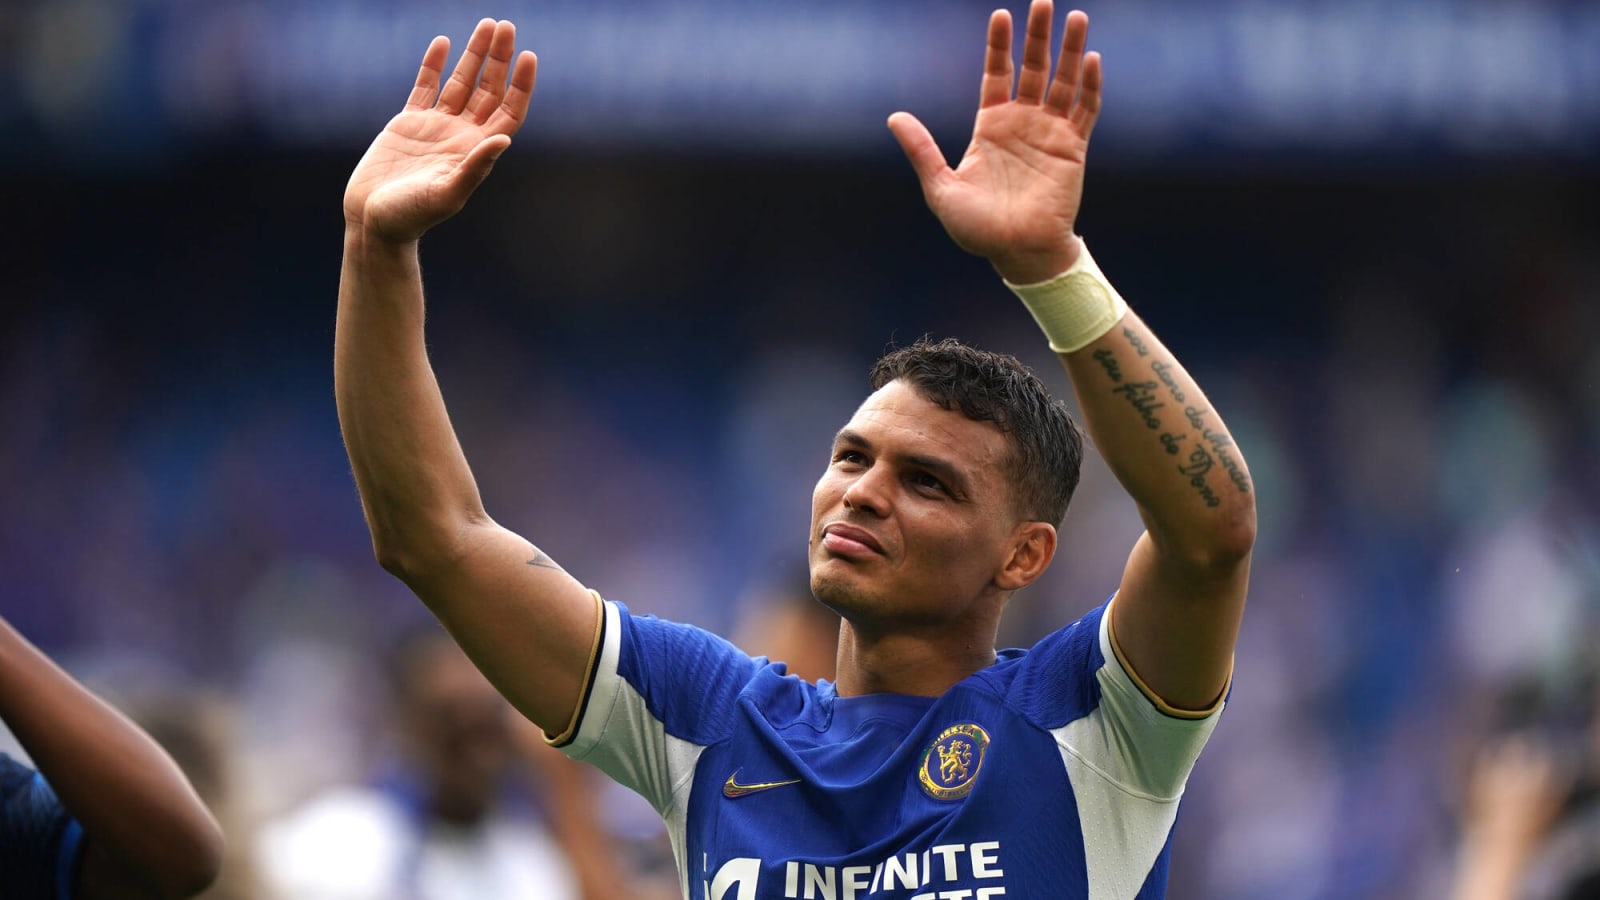 'From the bottom of my heart' – Chelsea player posts heartfelt message to fans